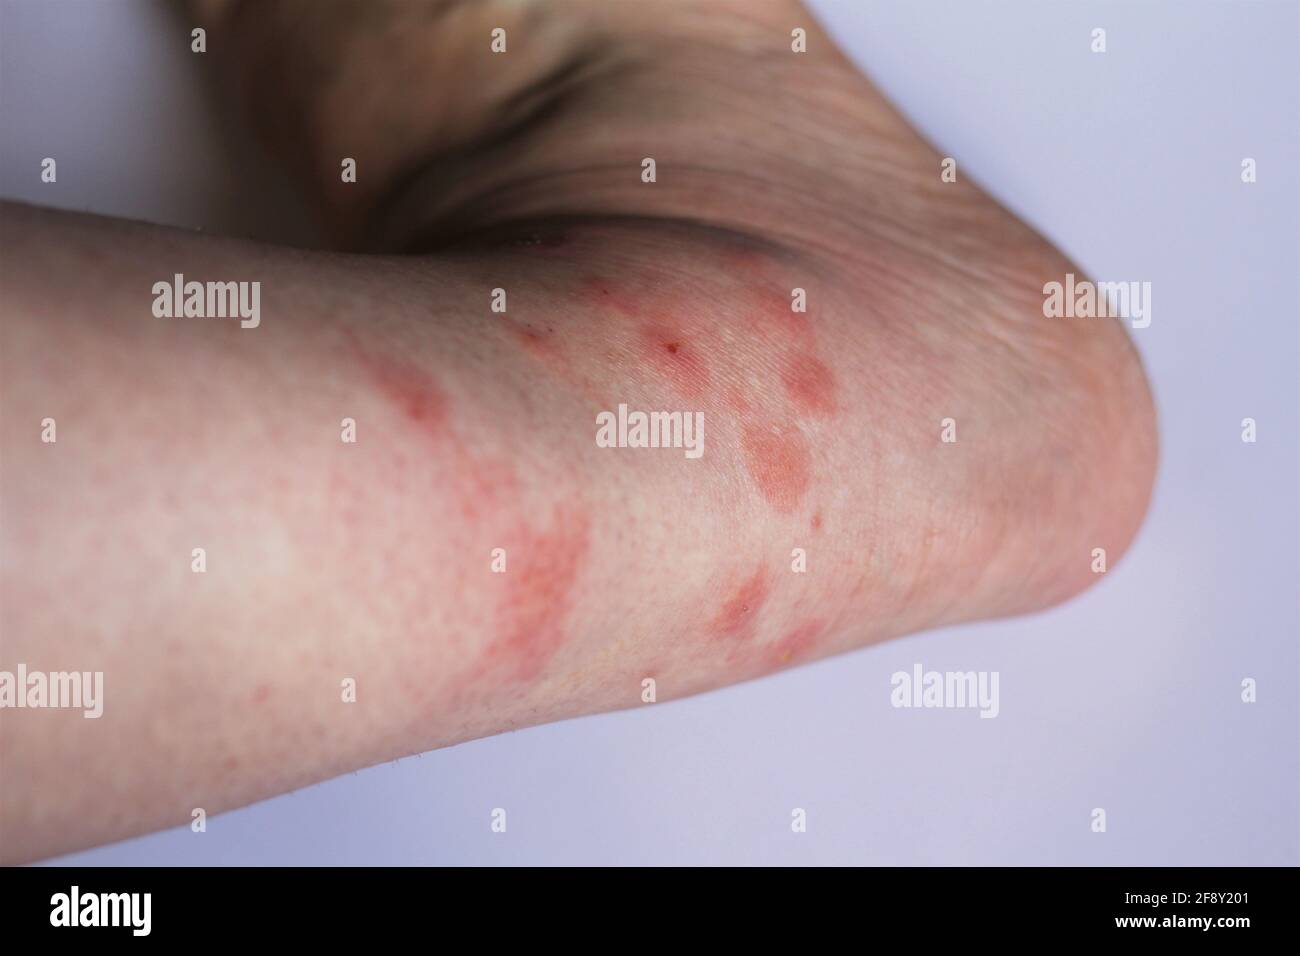 Selective focus on ankle. Woman's leg with multiple mosquito bites which has cause inflammation in her skin around the swollen ankle. Allergic reaction Stock Photo